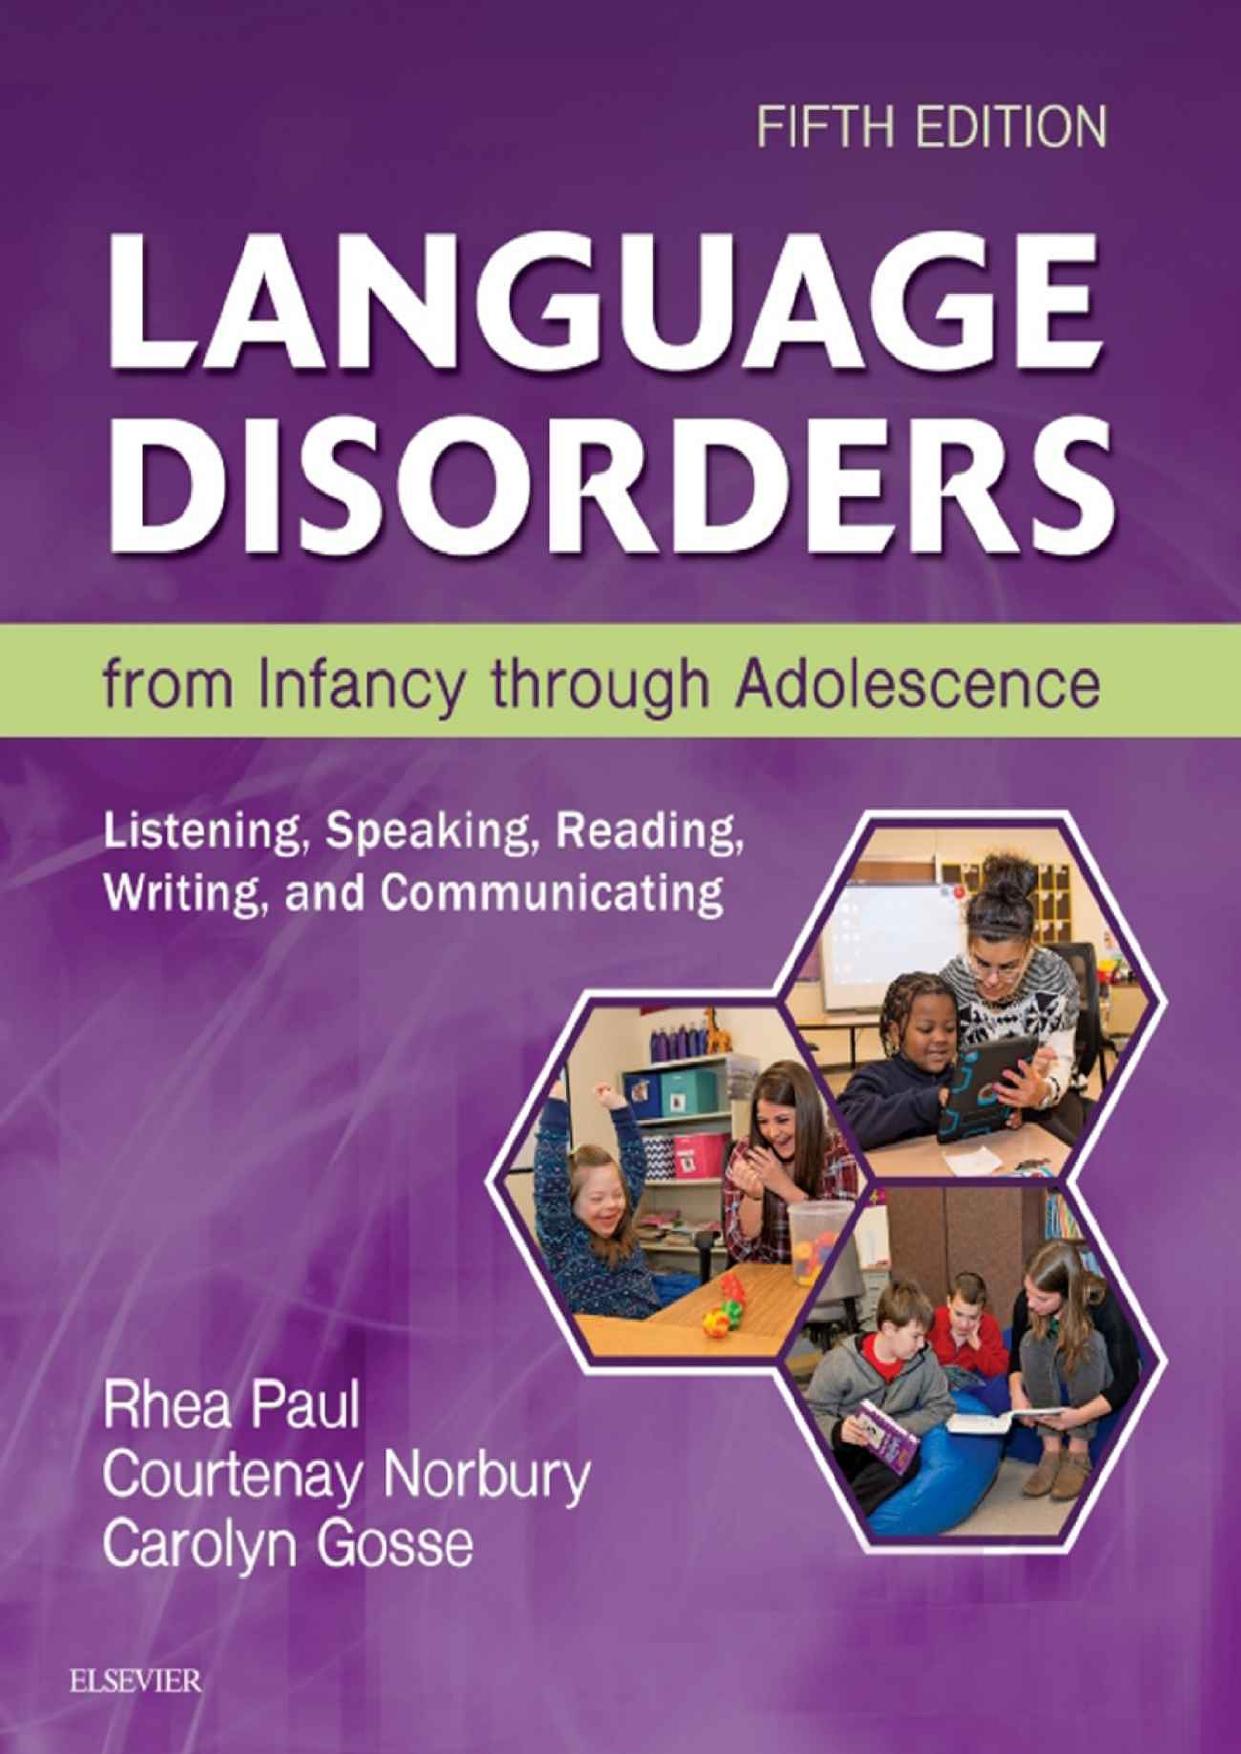 Language Disorders From Infancy Through Adolescence - E-Book: Listening, Speaking, Reading, Writing, and Communicating